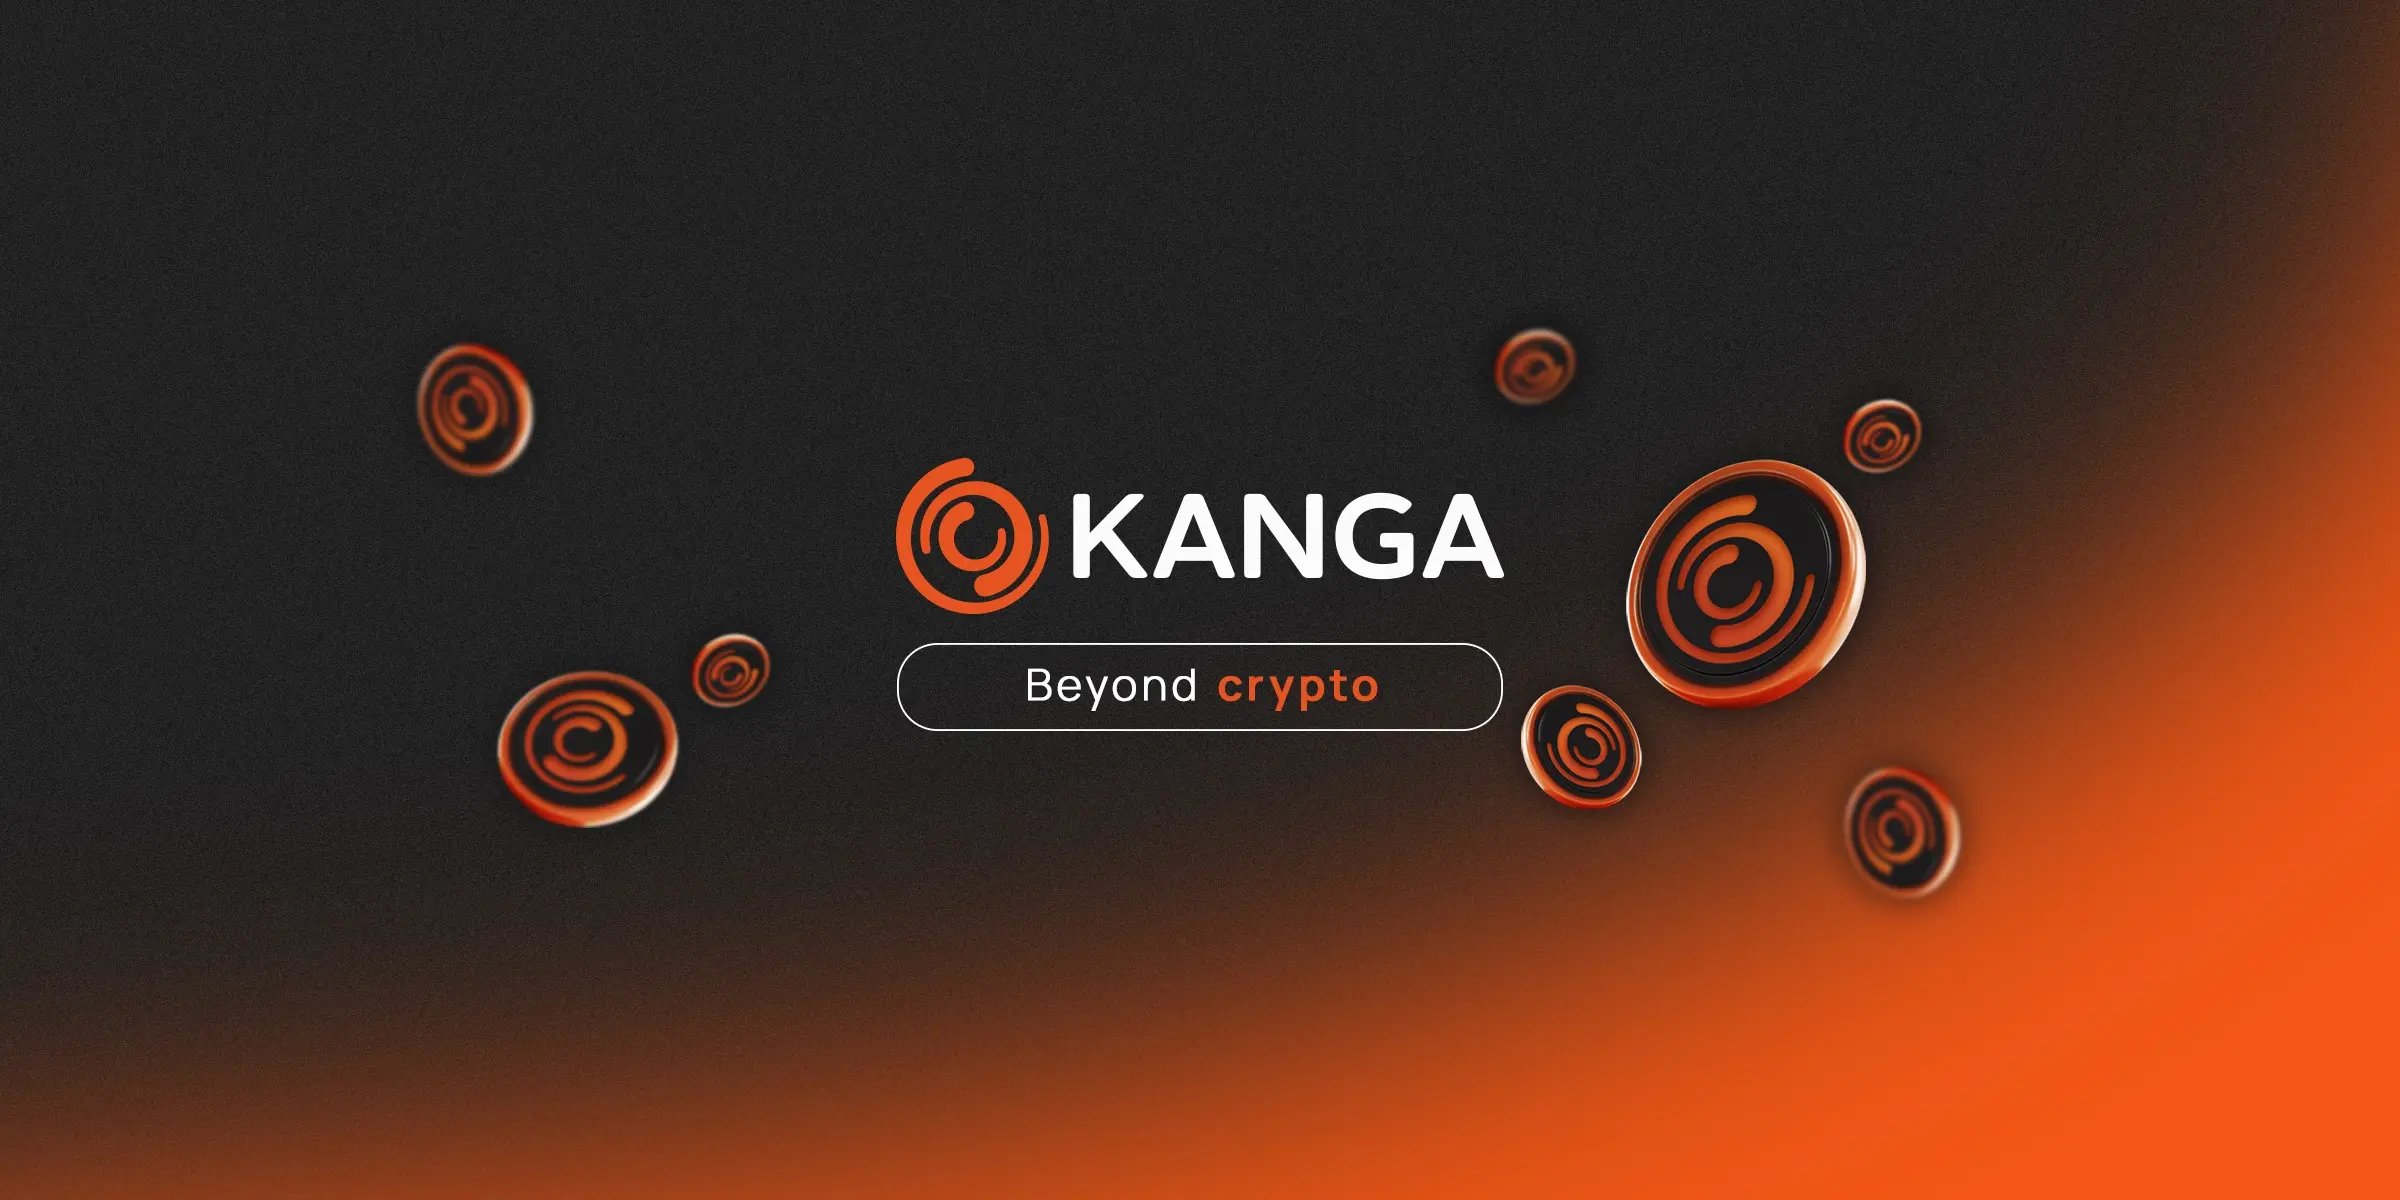 We are entering a new era of cryptocurrency trading with Kanga. Beyond crypto.